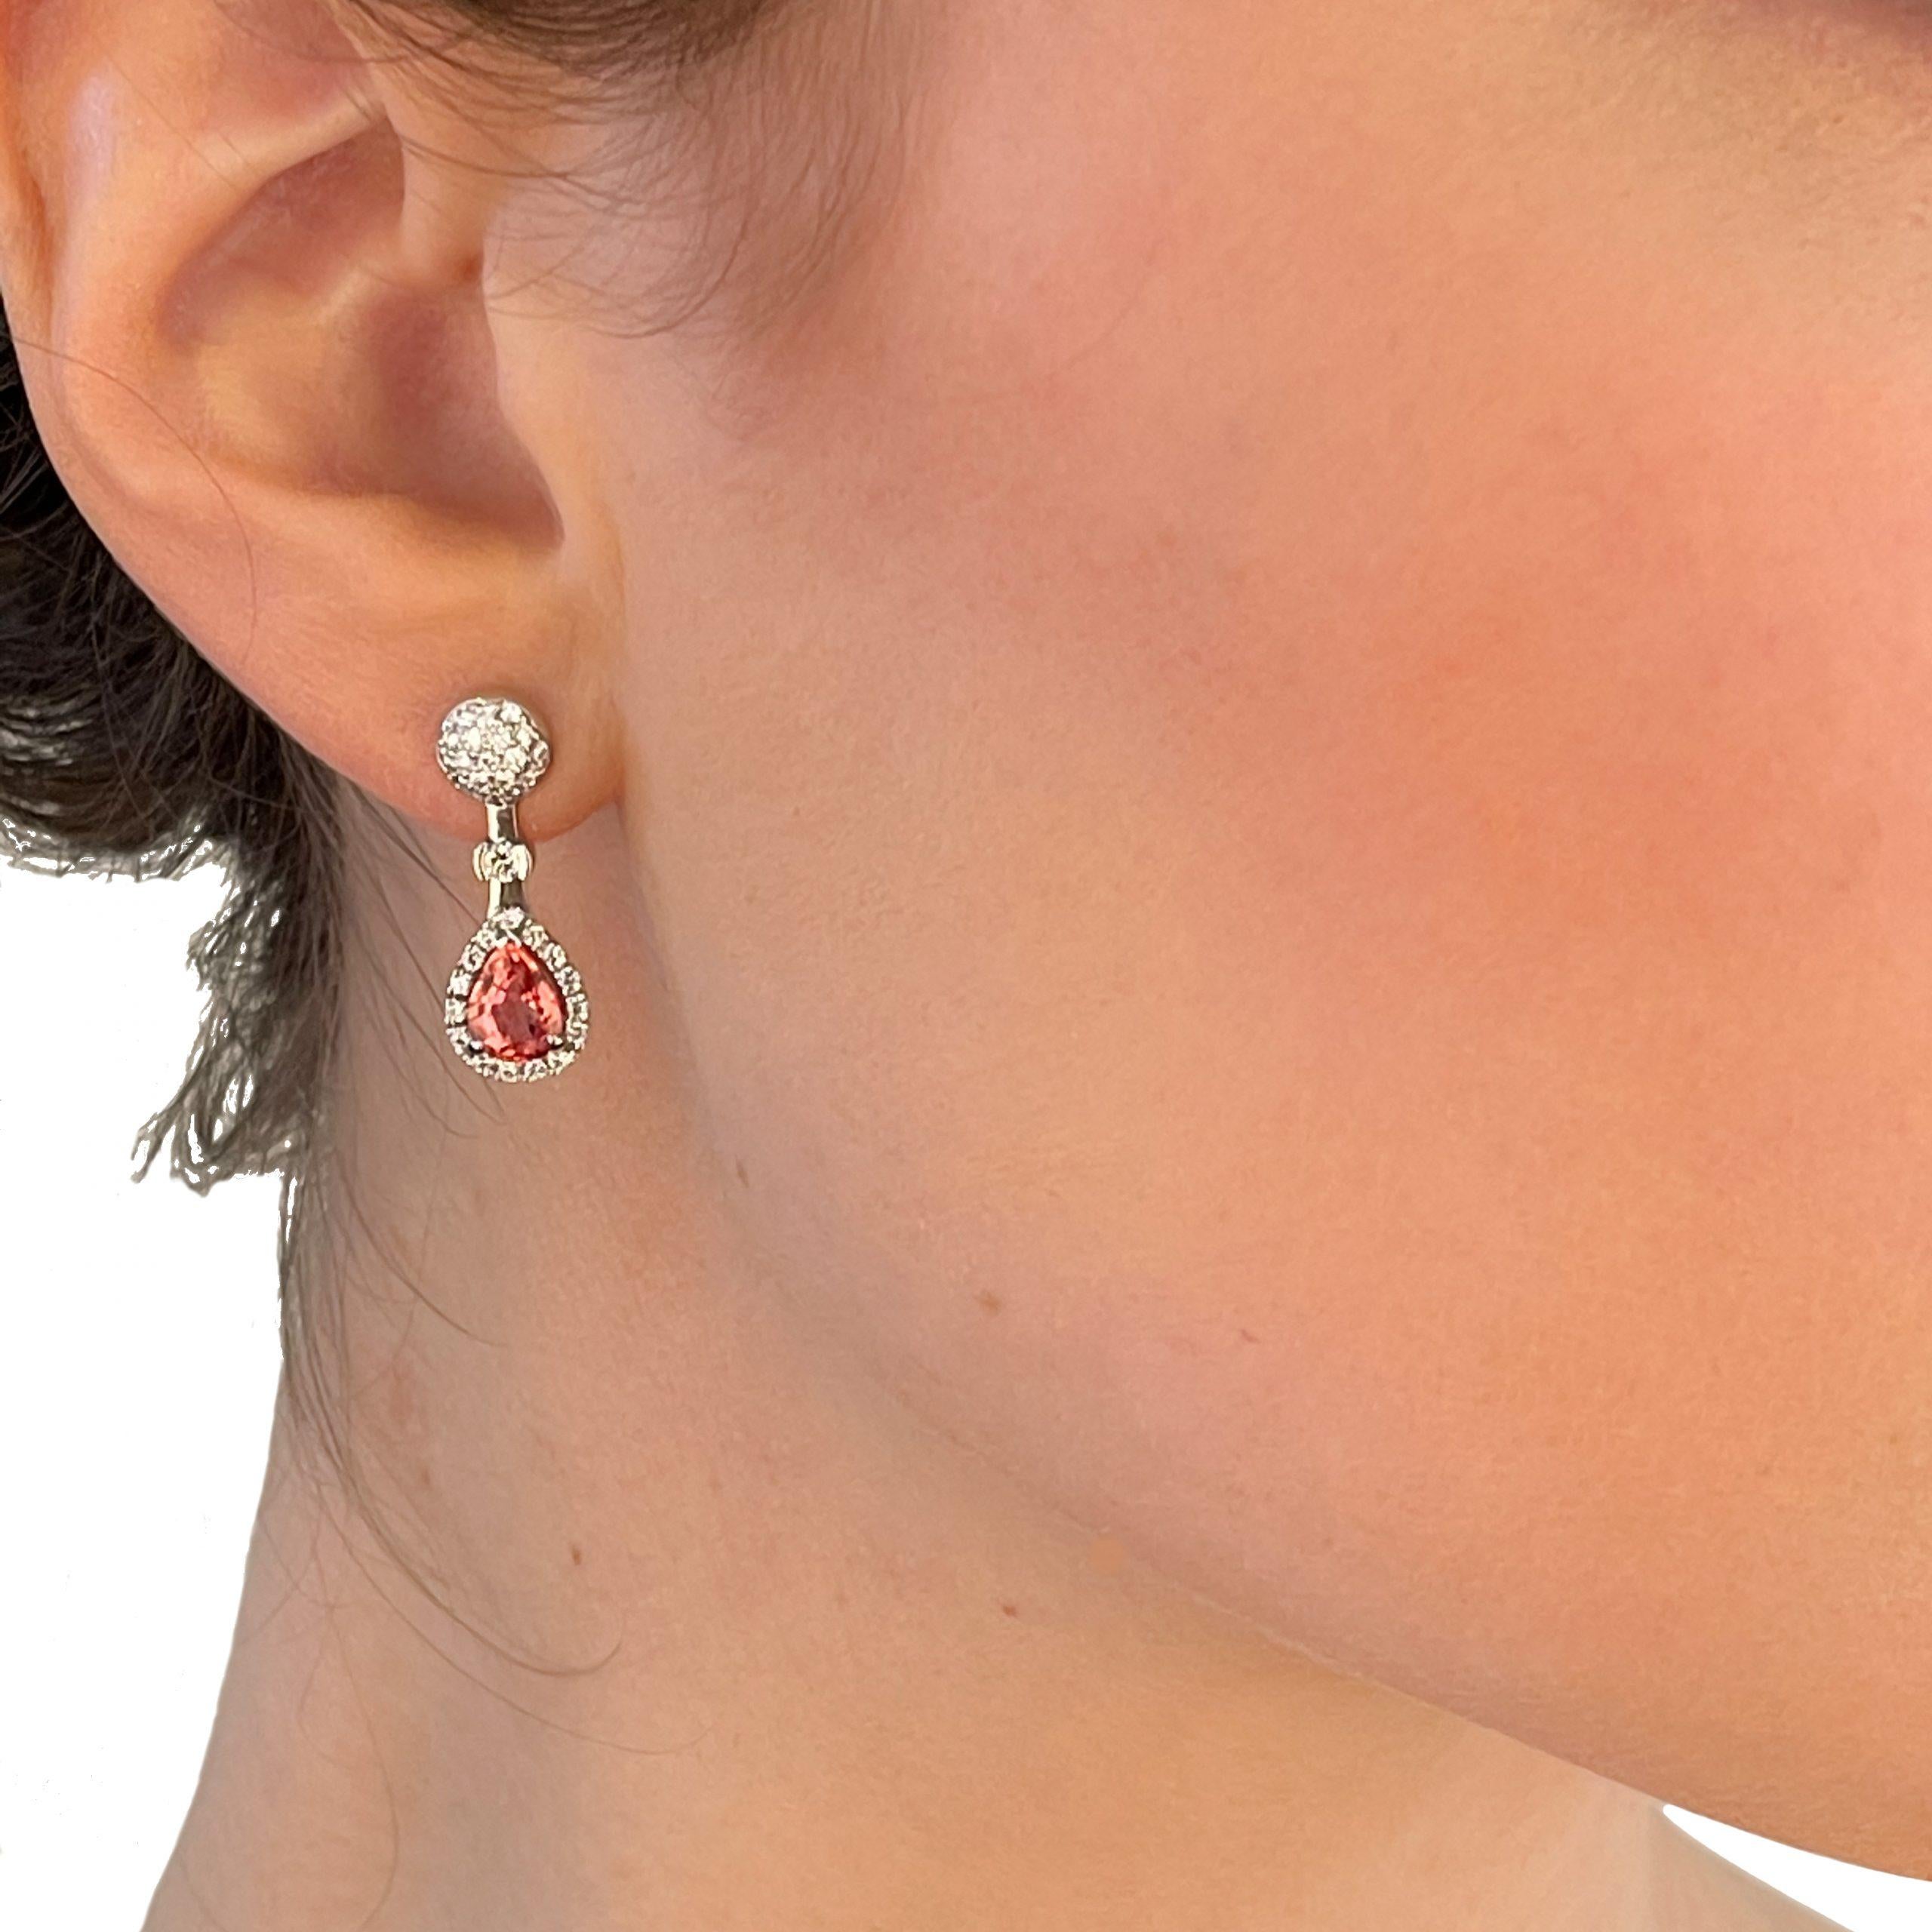 We invite you to see more of our collection from Cober Jewellery at 1stDibs!
You can type Cober Jewellery in the search bar to view more pieces of jewellery at our webshop.

These are 18 Carat white gold earrings with beautiful pear-cut Padparadscha